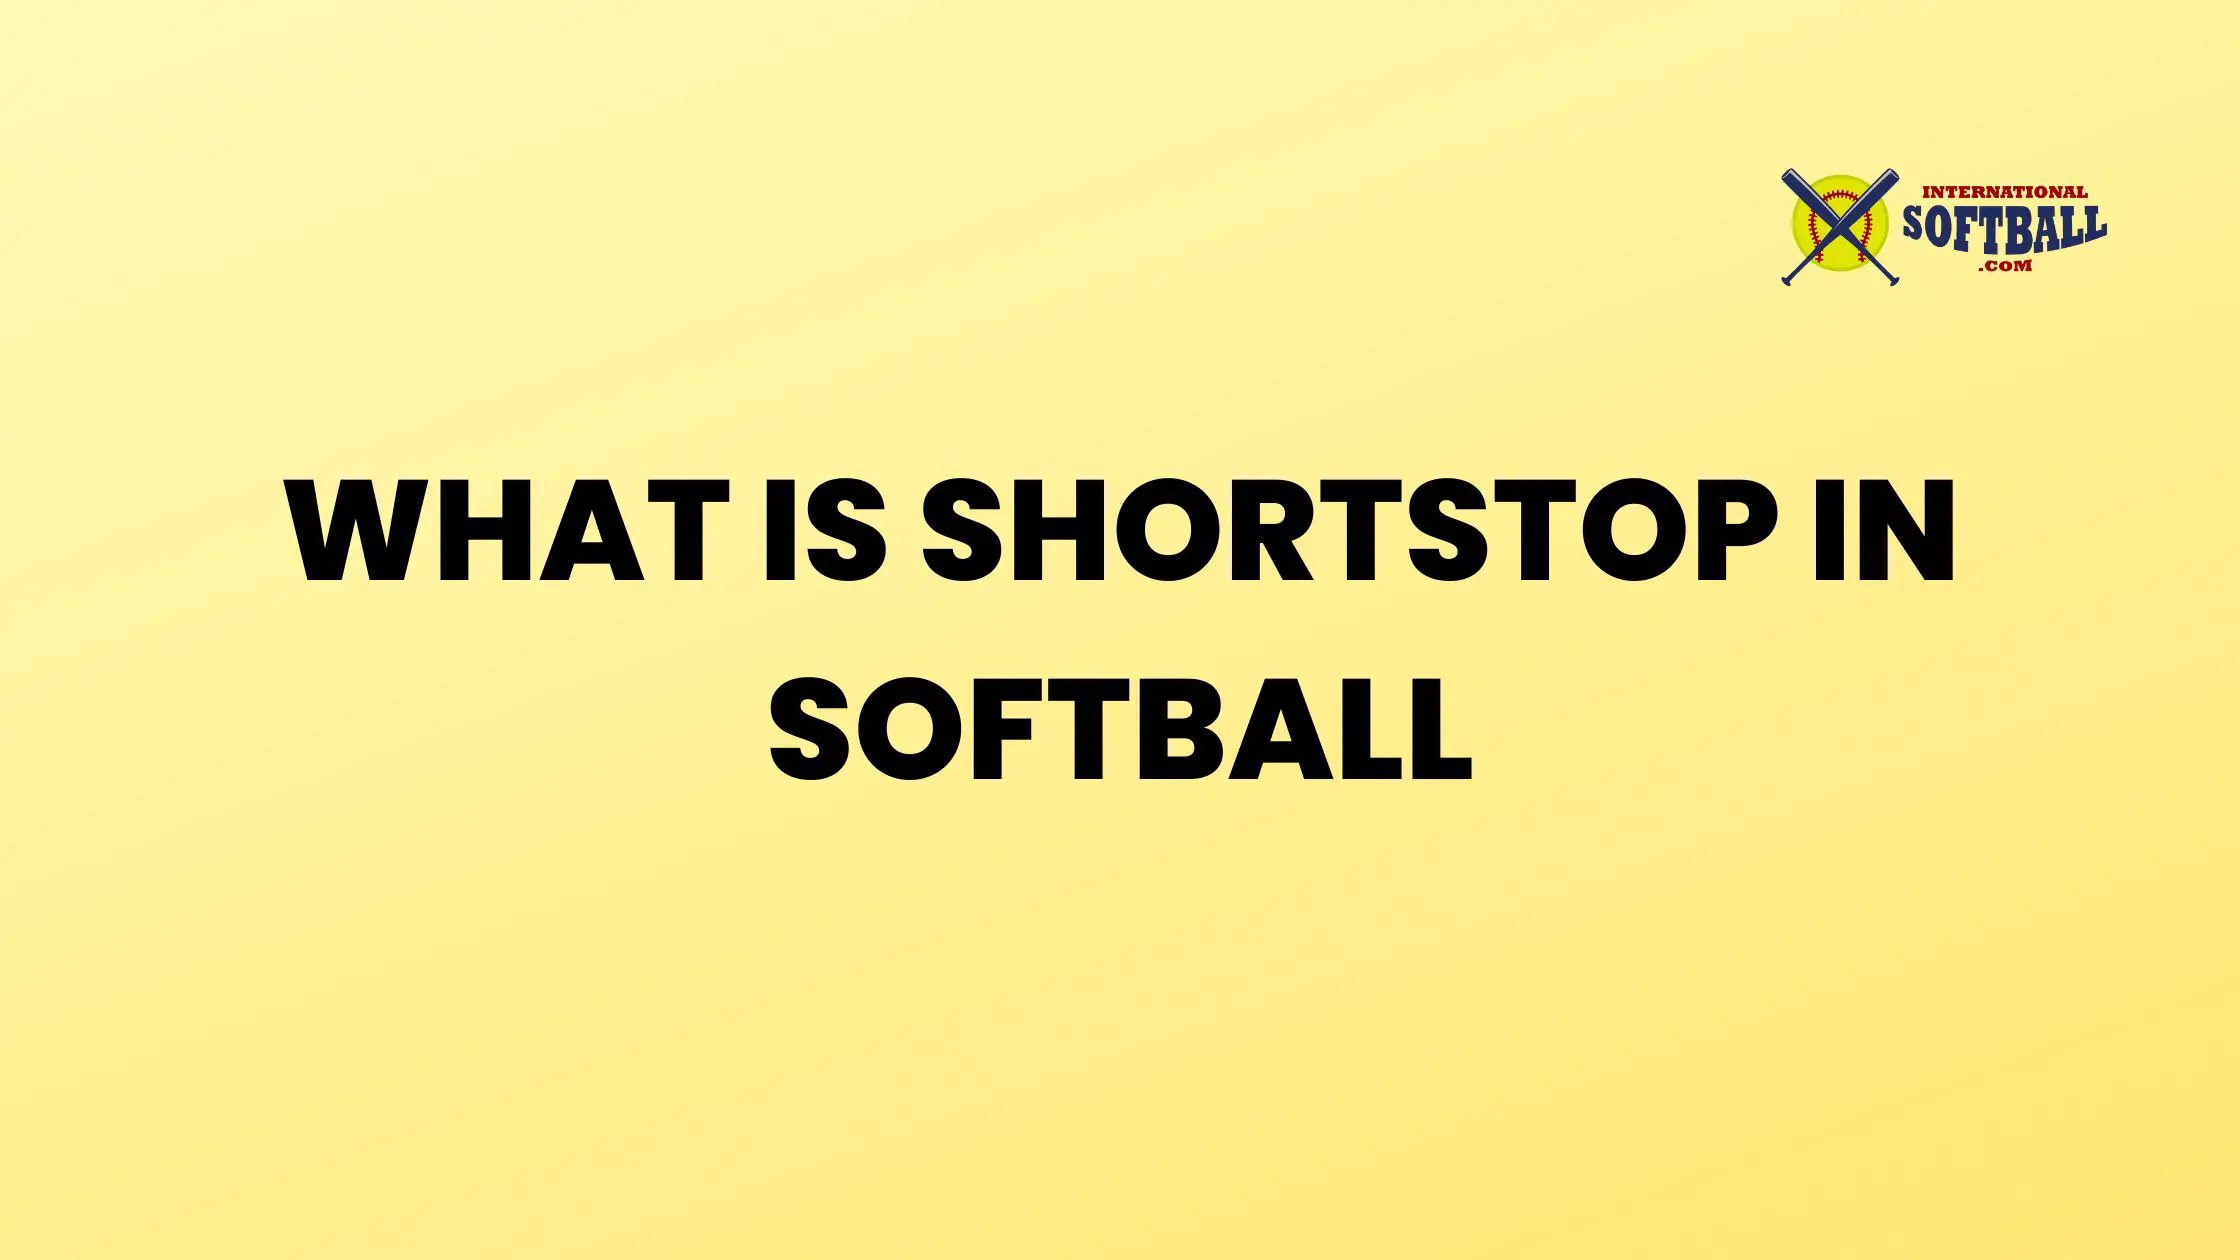 WHAT IS SHORTSTOP IN SOFTBALL